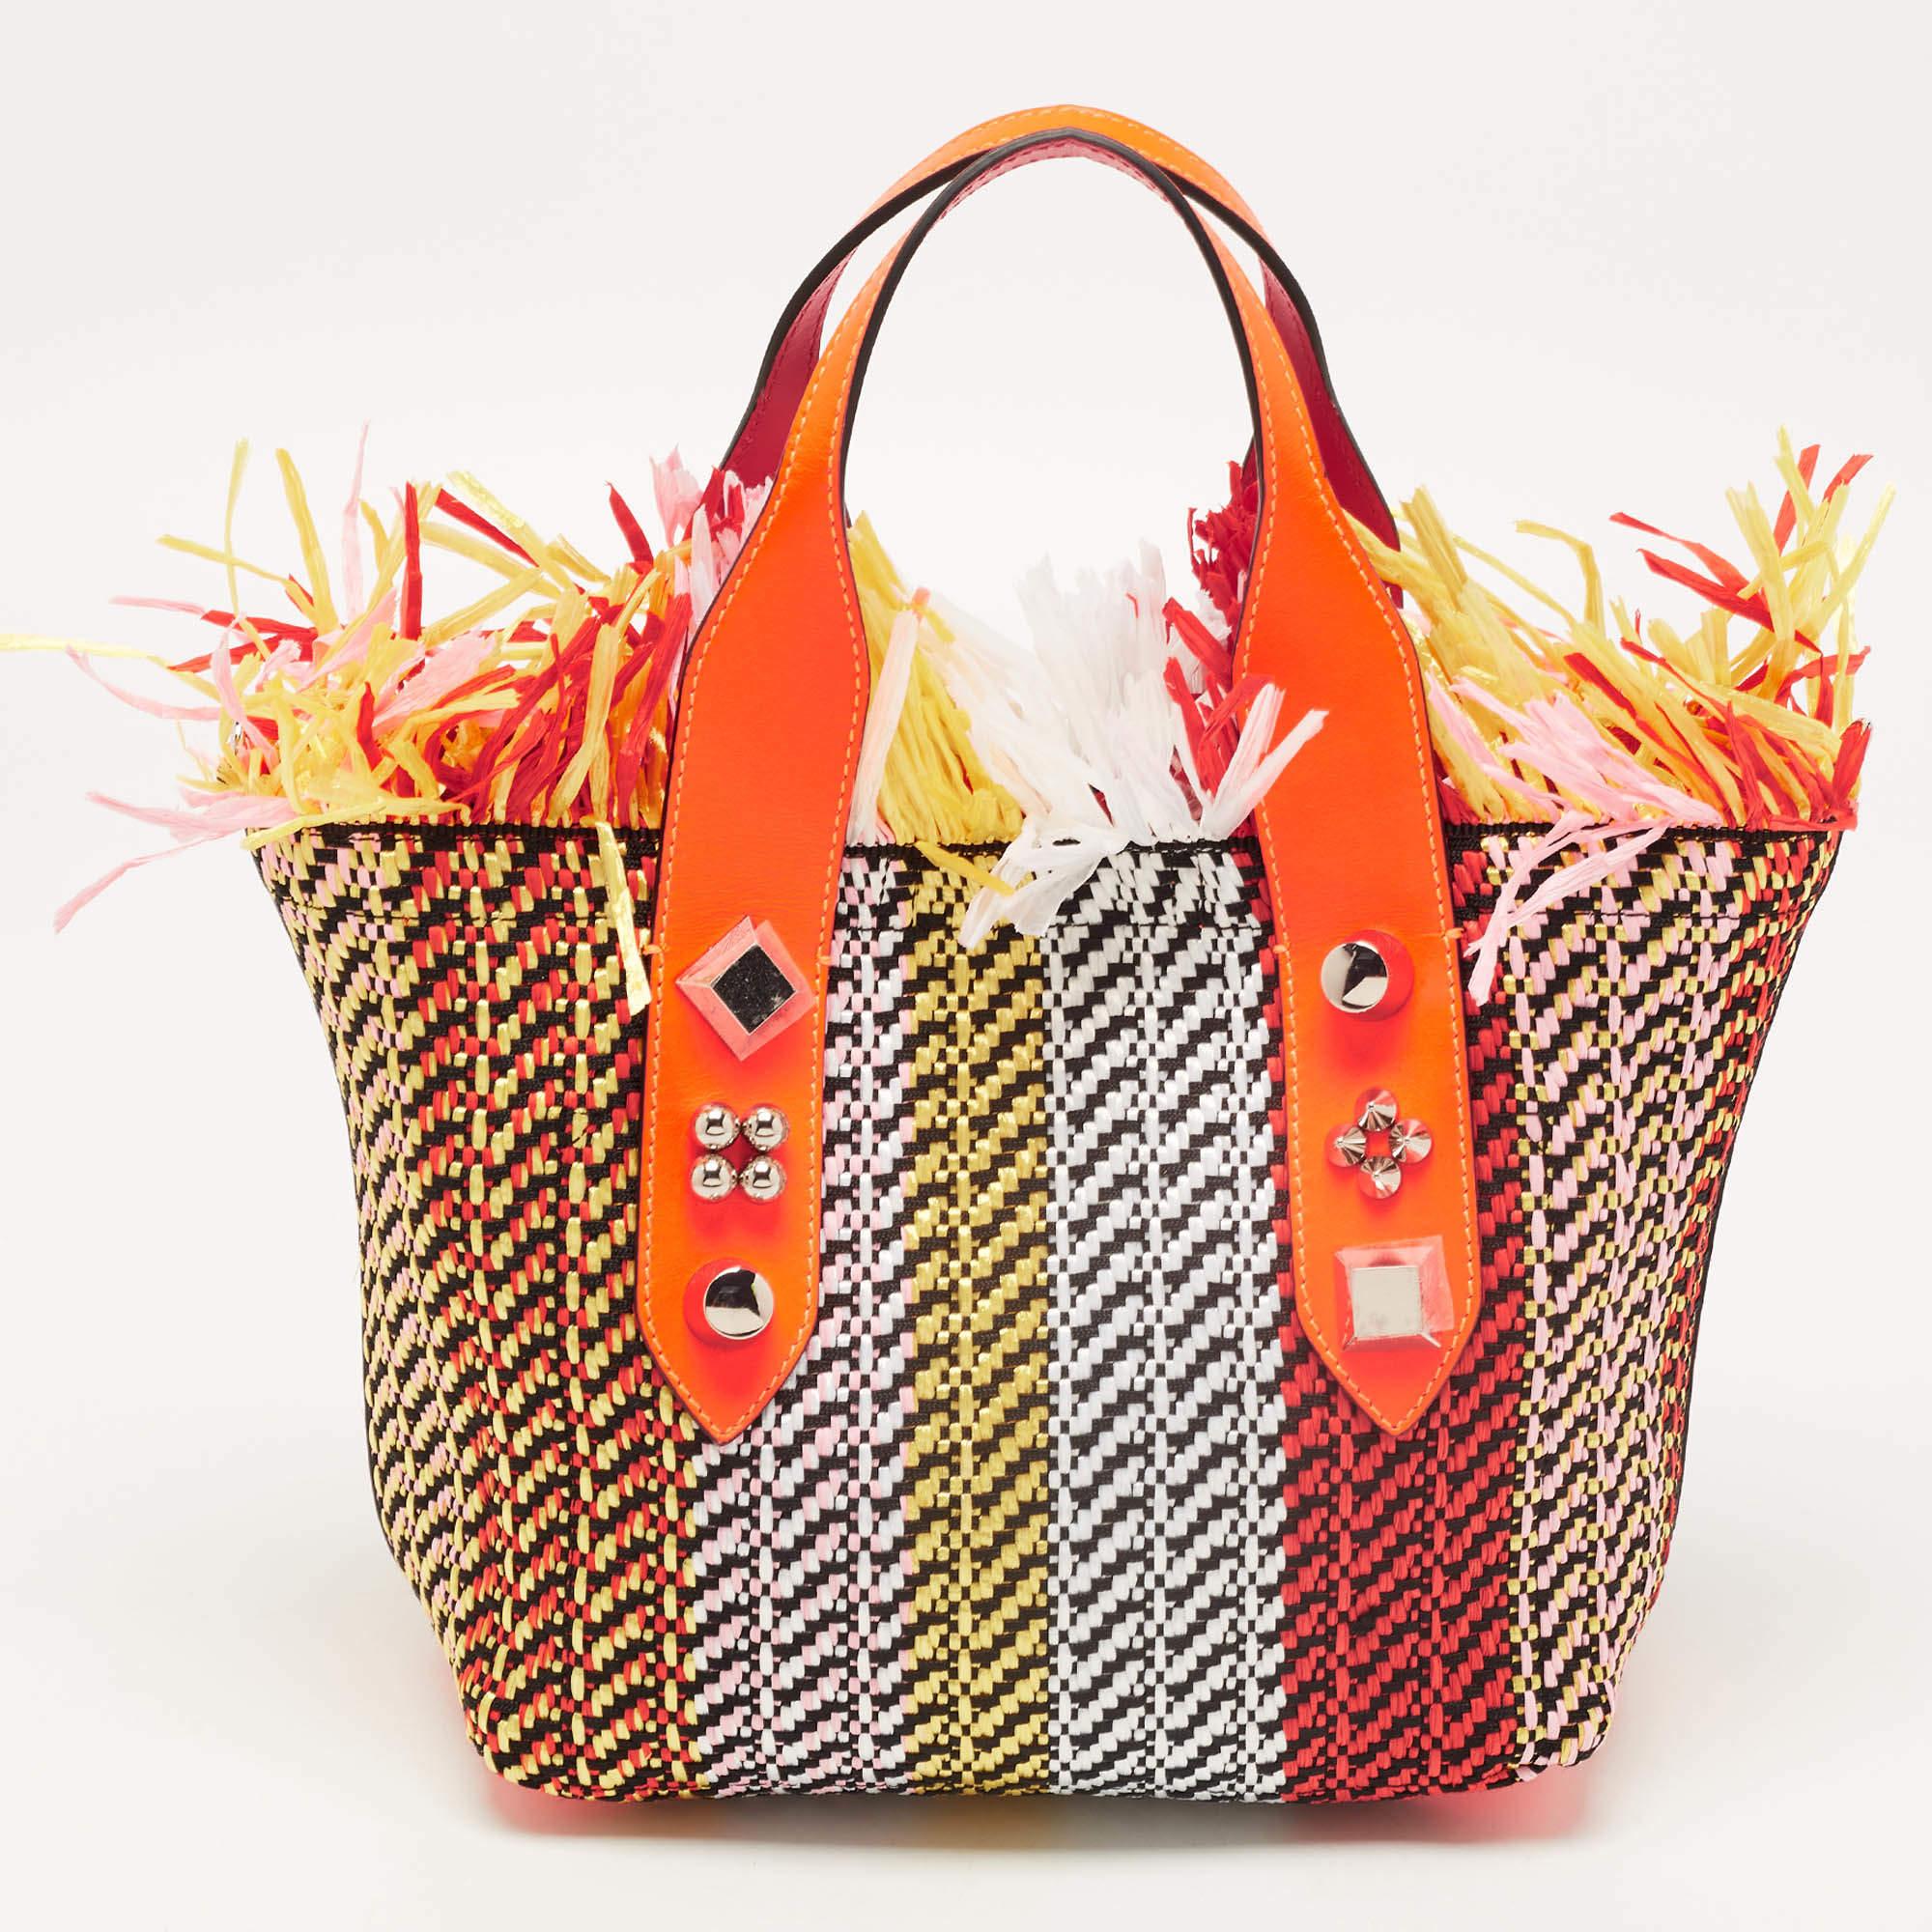 The Christian Louboutin Frangibus tote is a stylish and eye-catching accessory. It features a combination of straw and leather materials in a vibrant multicolor design. The tote is adorned with small fringes, adding a touch of playfulness and